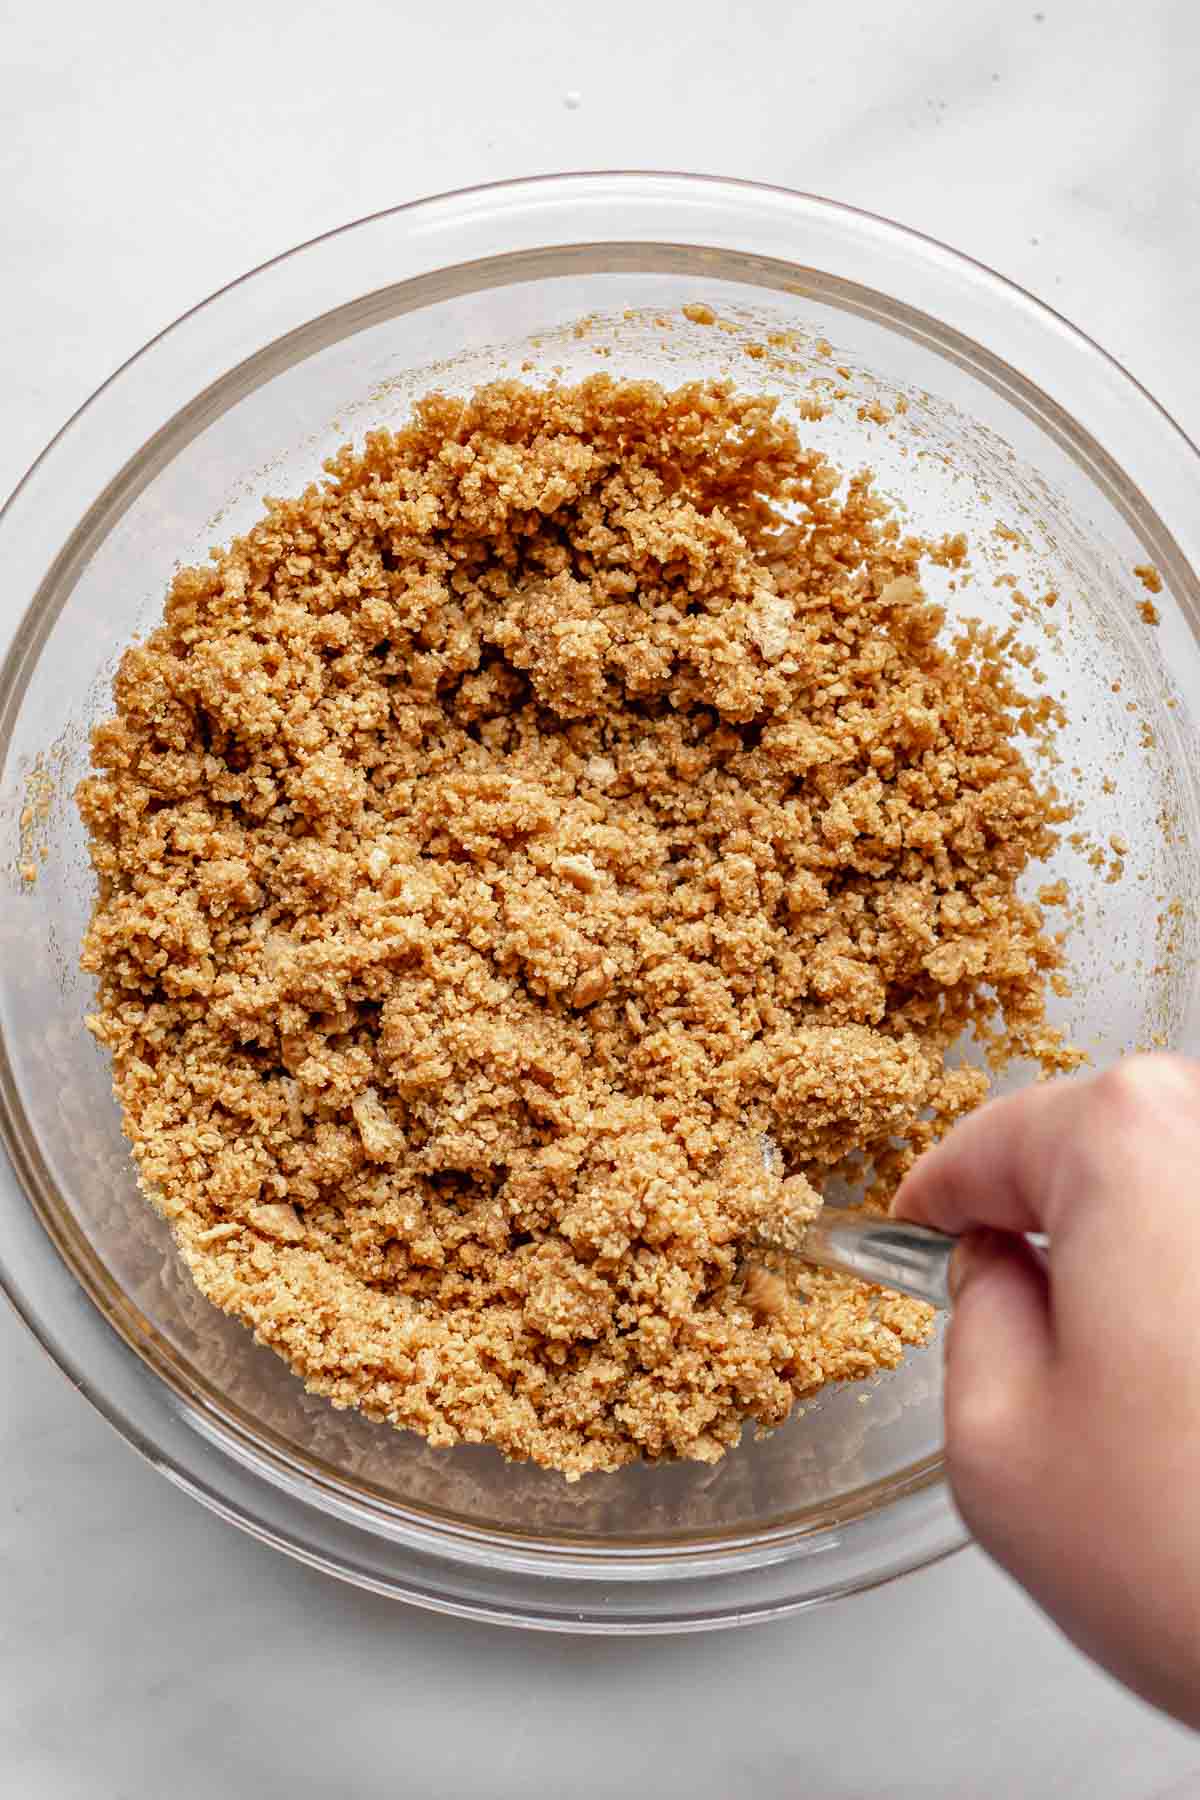 Mixing graham cracker crumbs together with a fork.